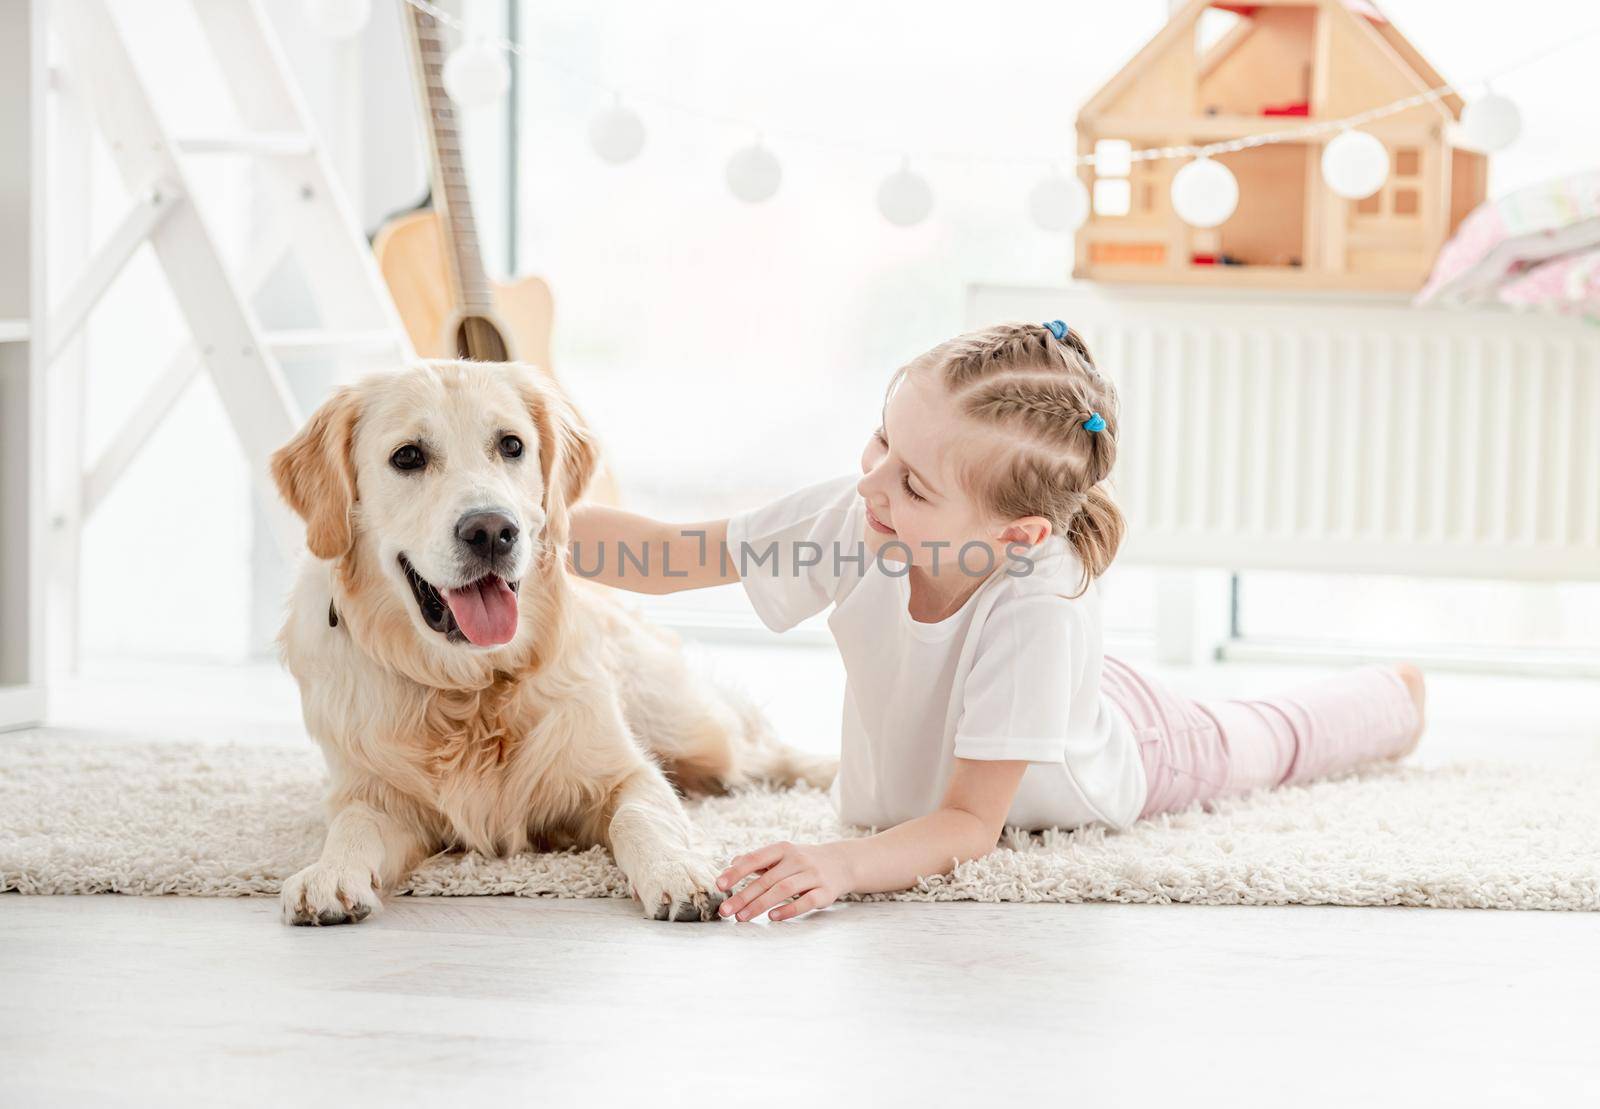 Smiling little girl petting adorable dog in bright room